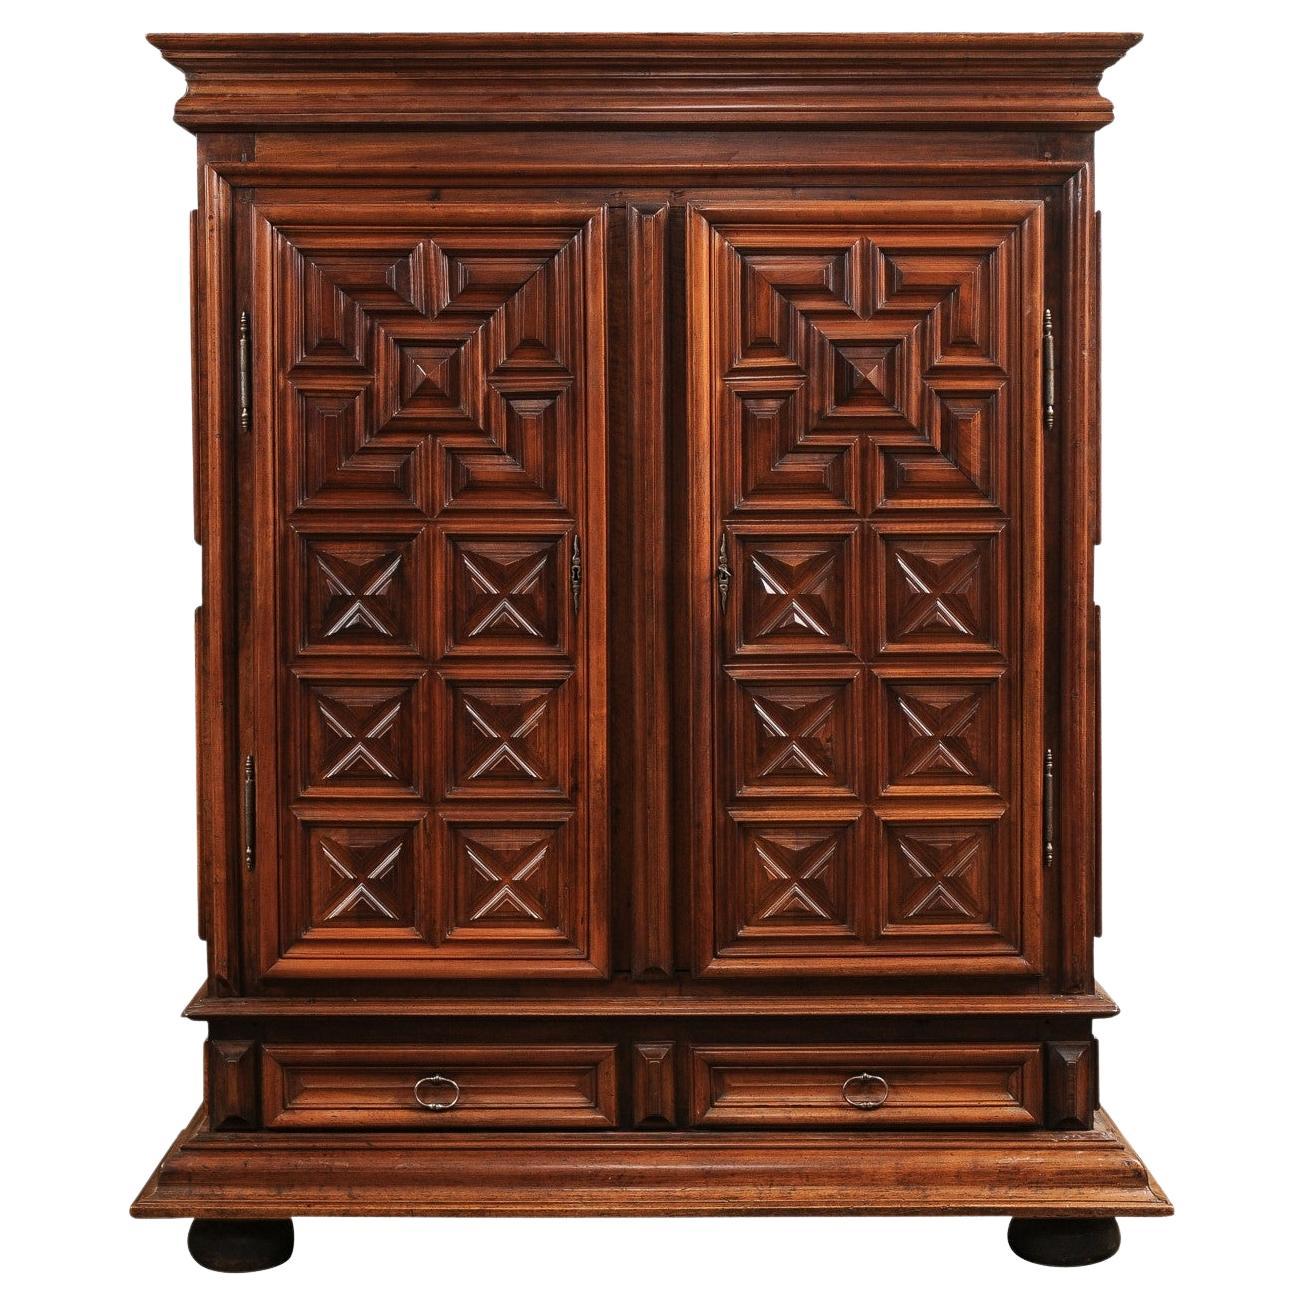 French Early 17th Century Louis XIII Period Walnut Armoire with Geometric Motifs For Sale